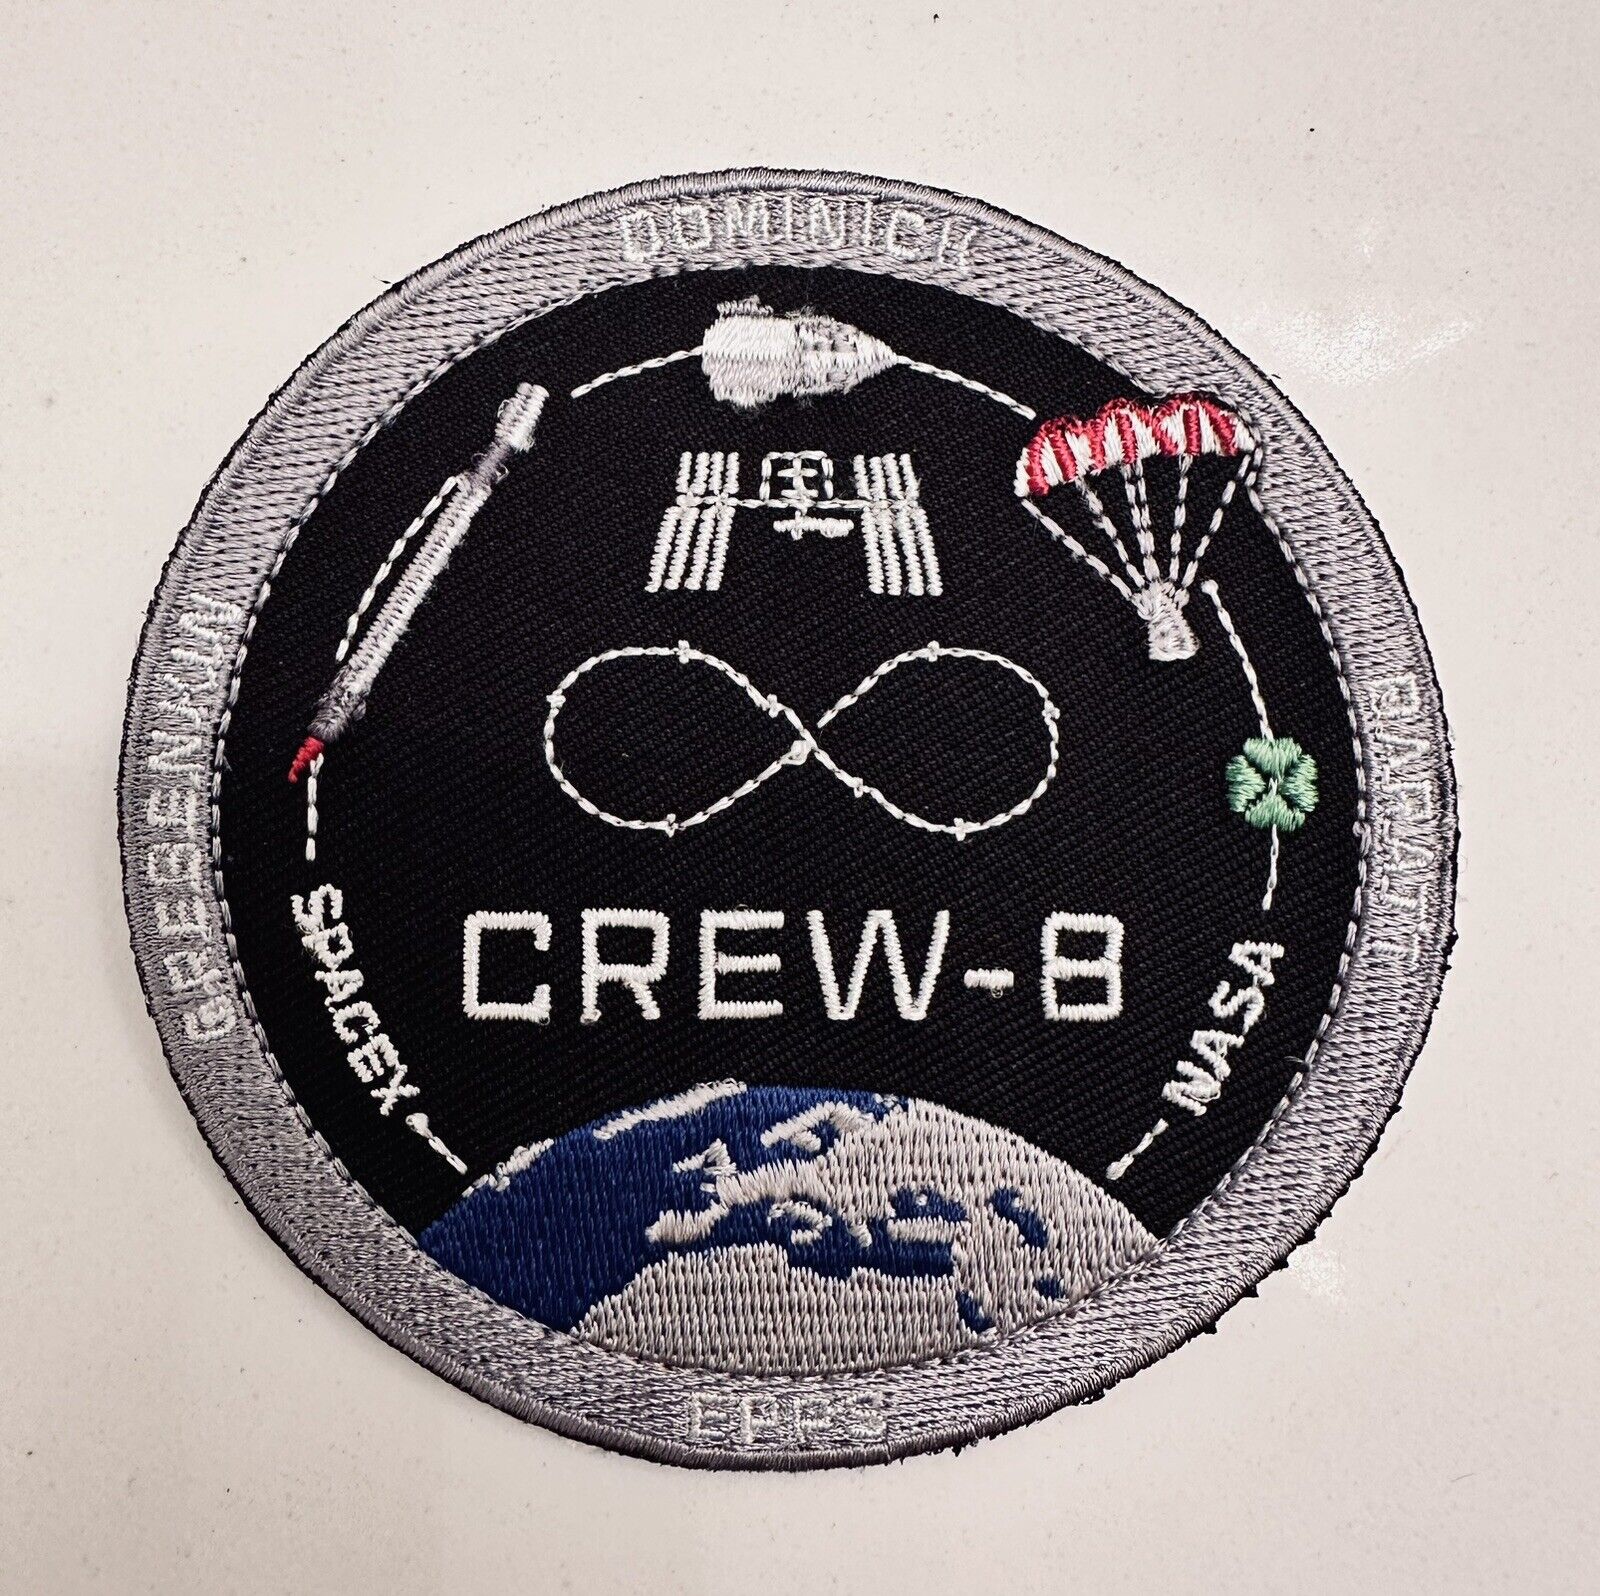 OrIginal NASA SPACEX CREW 8 ISS Mission CREW DRAGON SPACE PATCH 3.5”